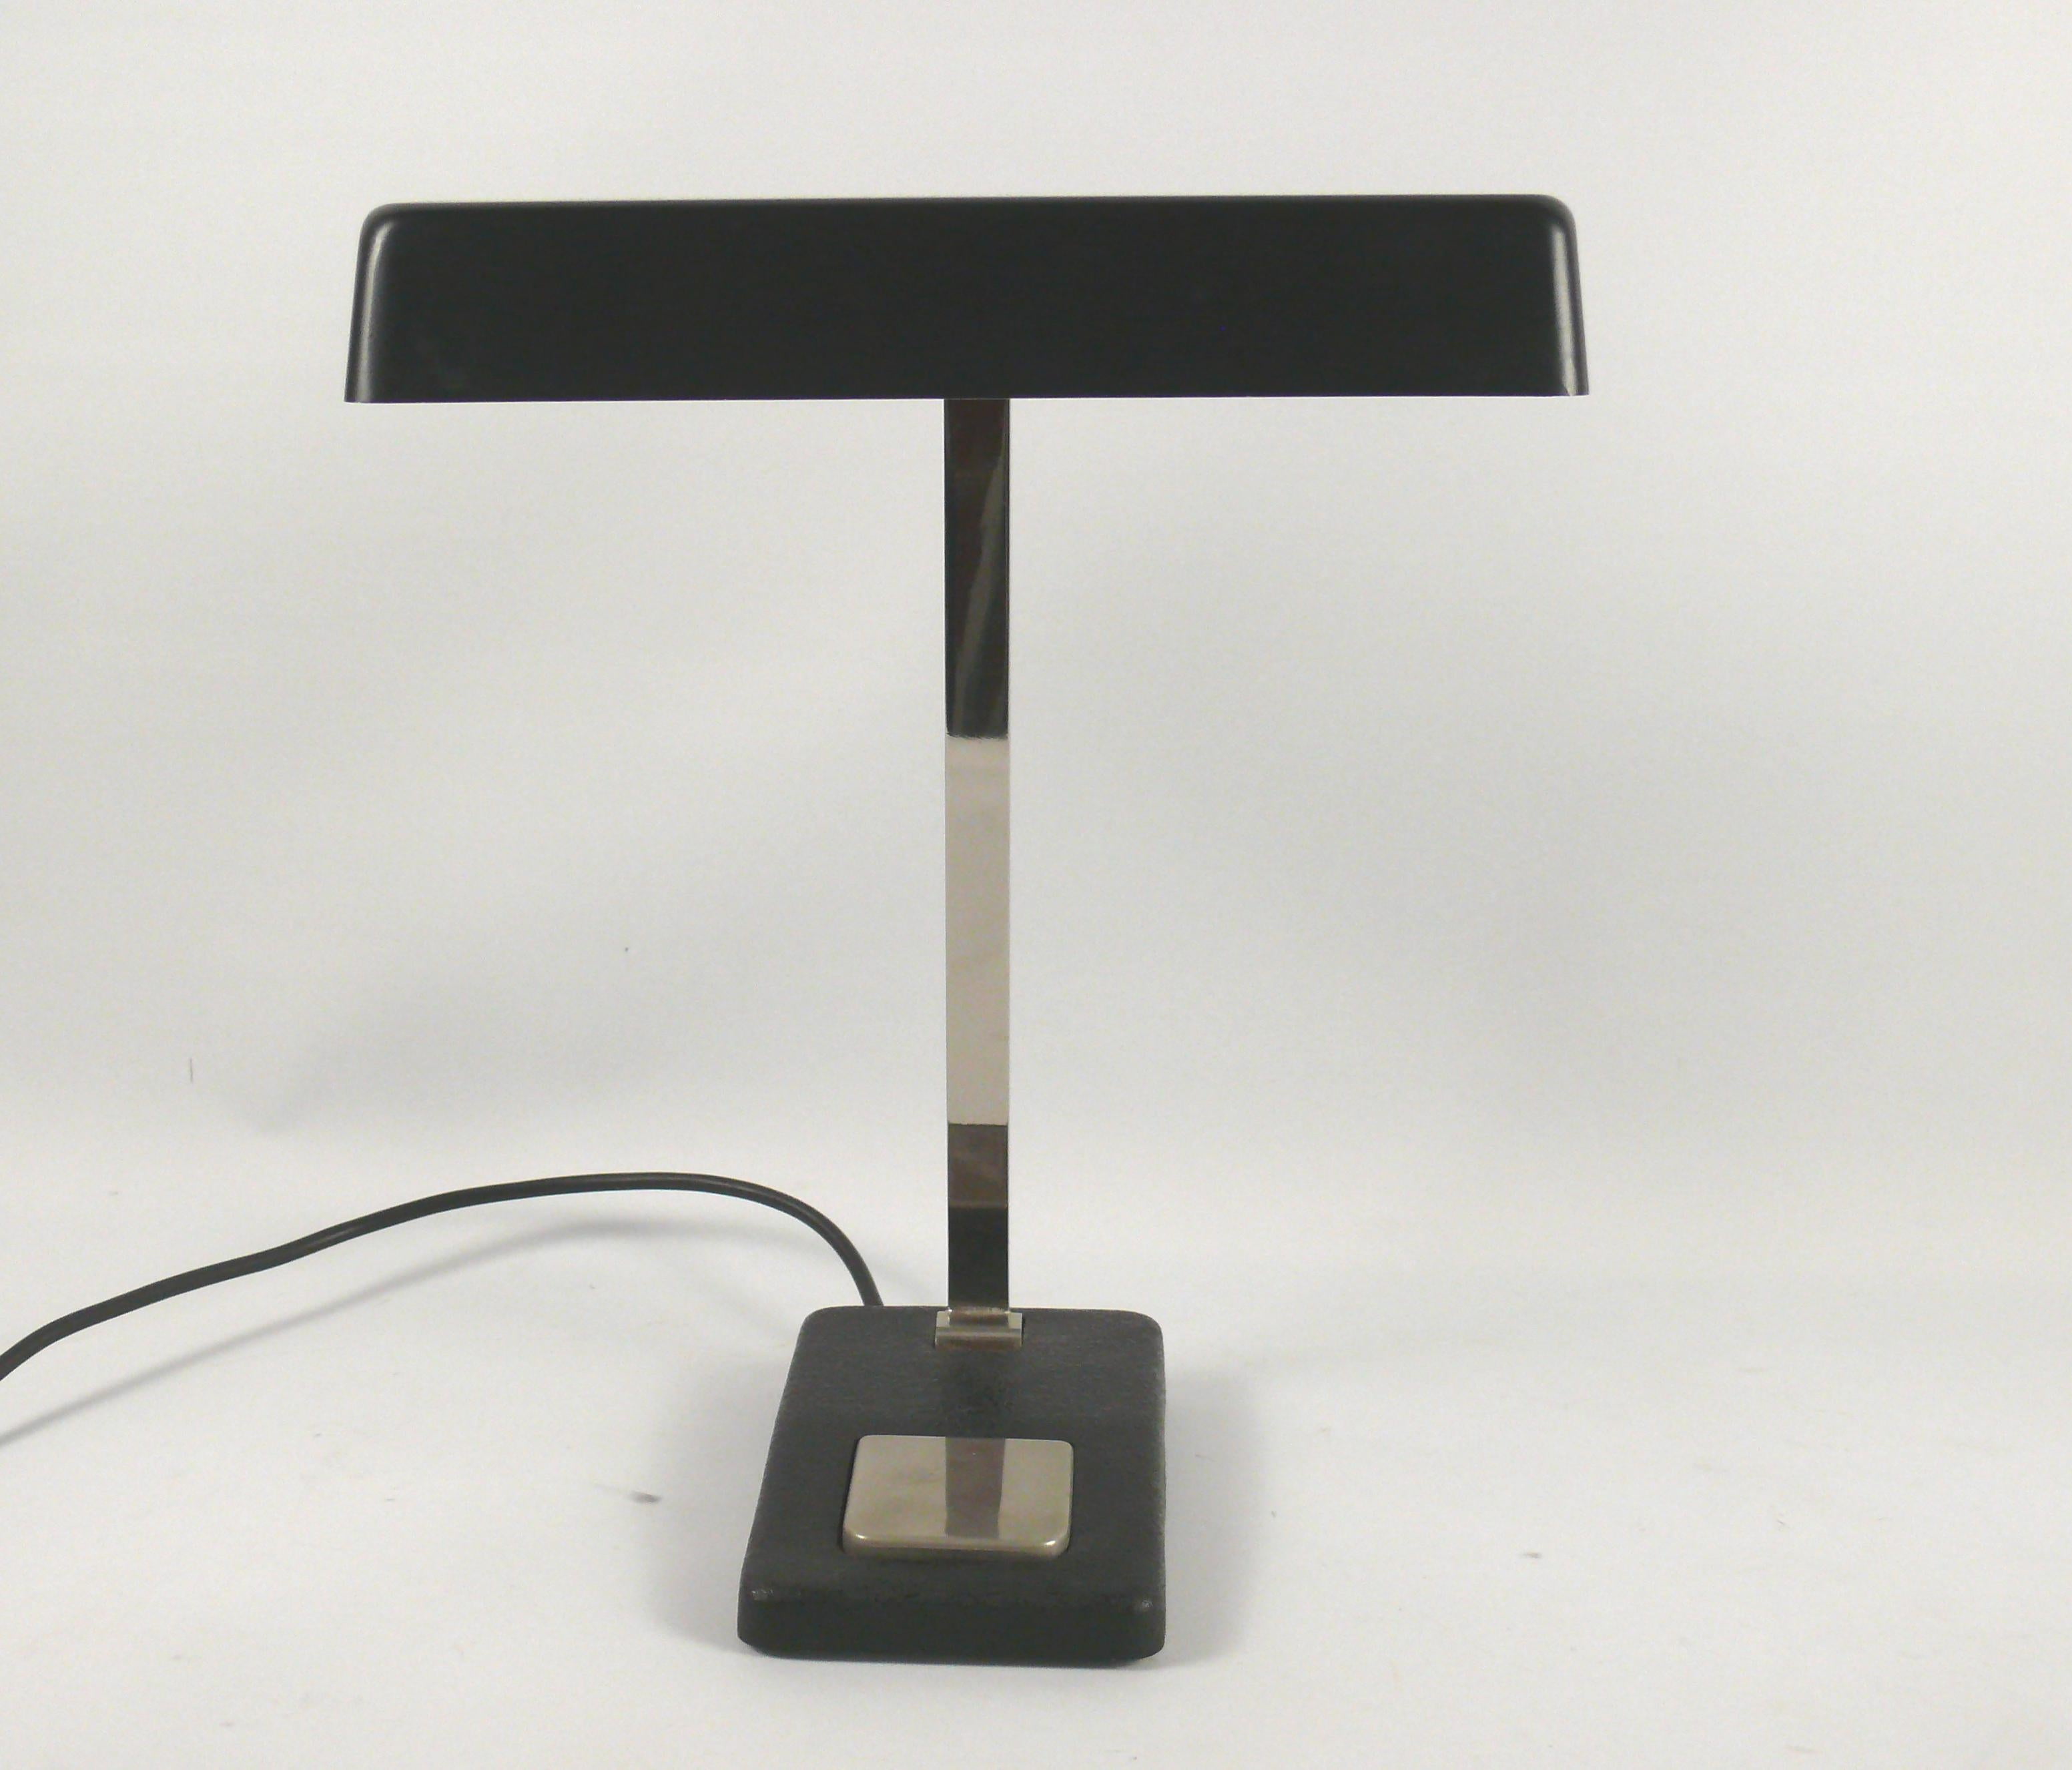 Midcentury Piano Lamp / Table Lamp, made by Hillebrand - Germany, 1960s For Sale 1